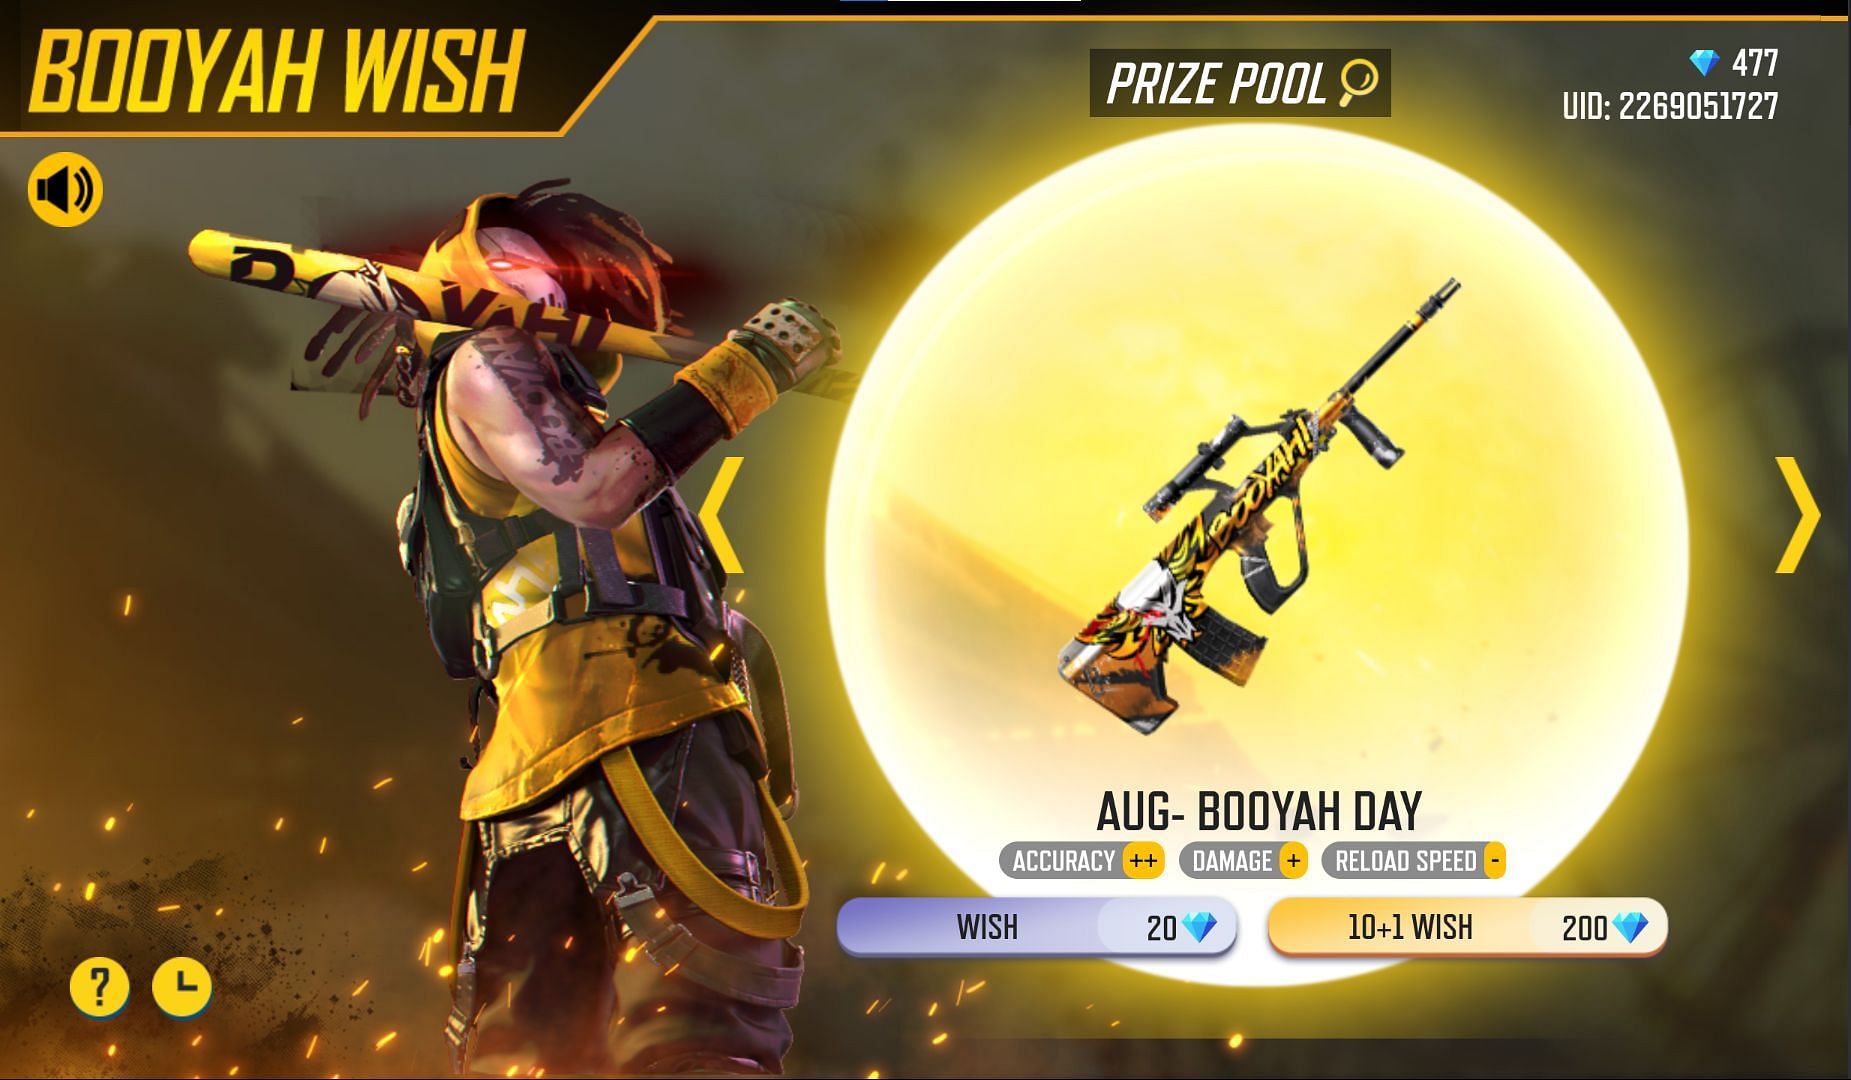 Make the preferred number of wishes (Image via Free Fire)